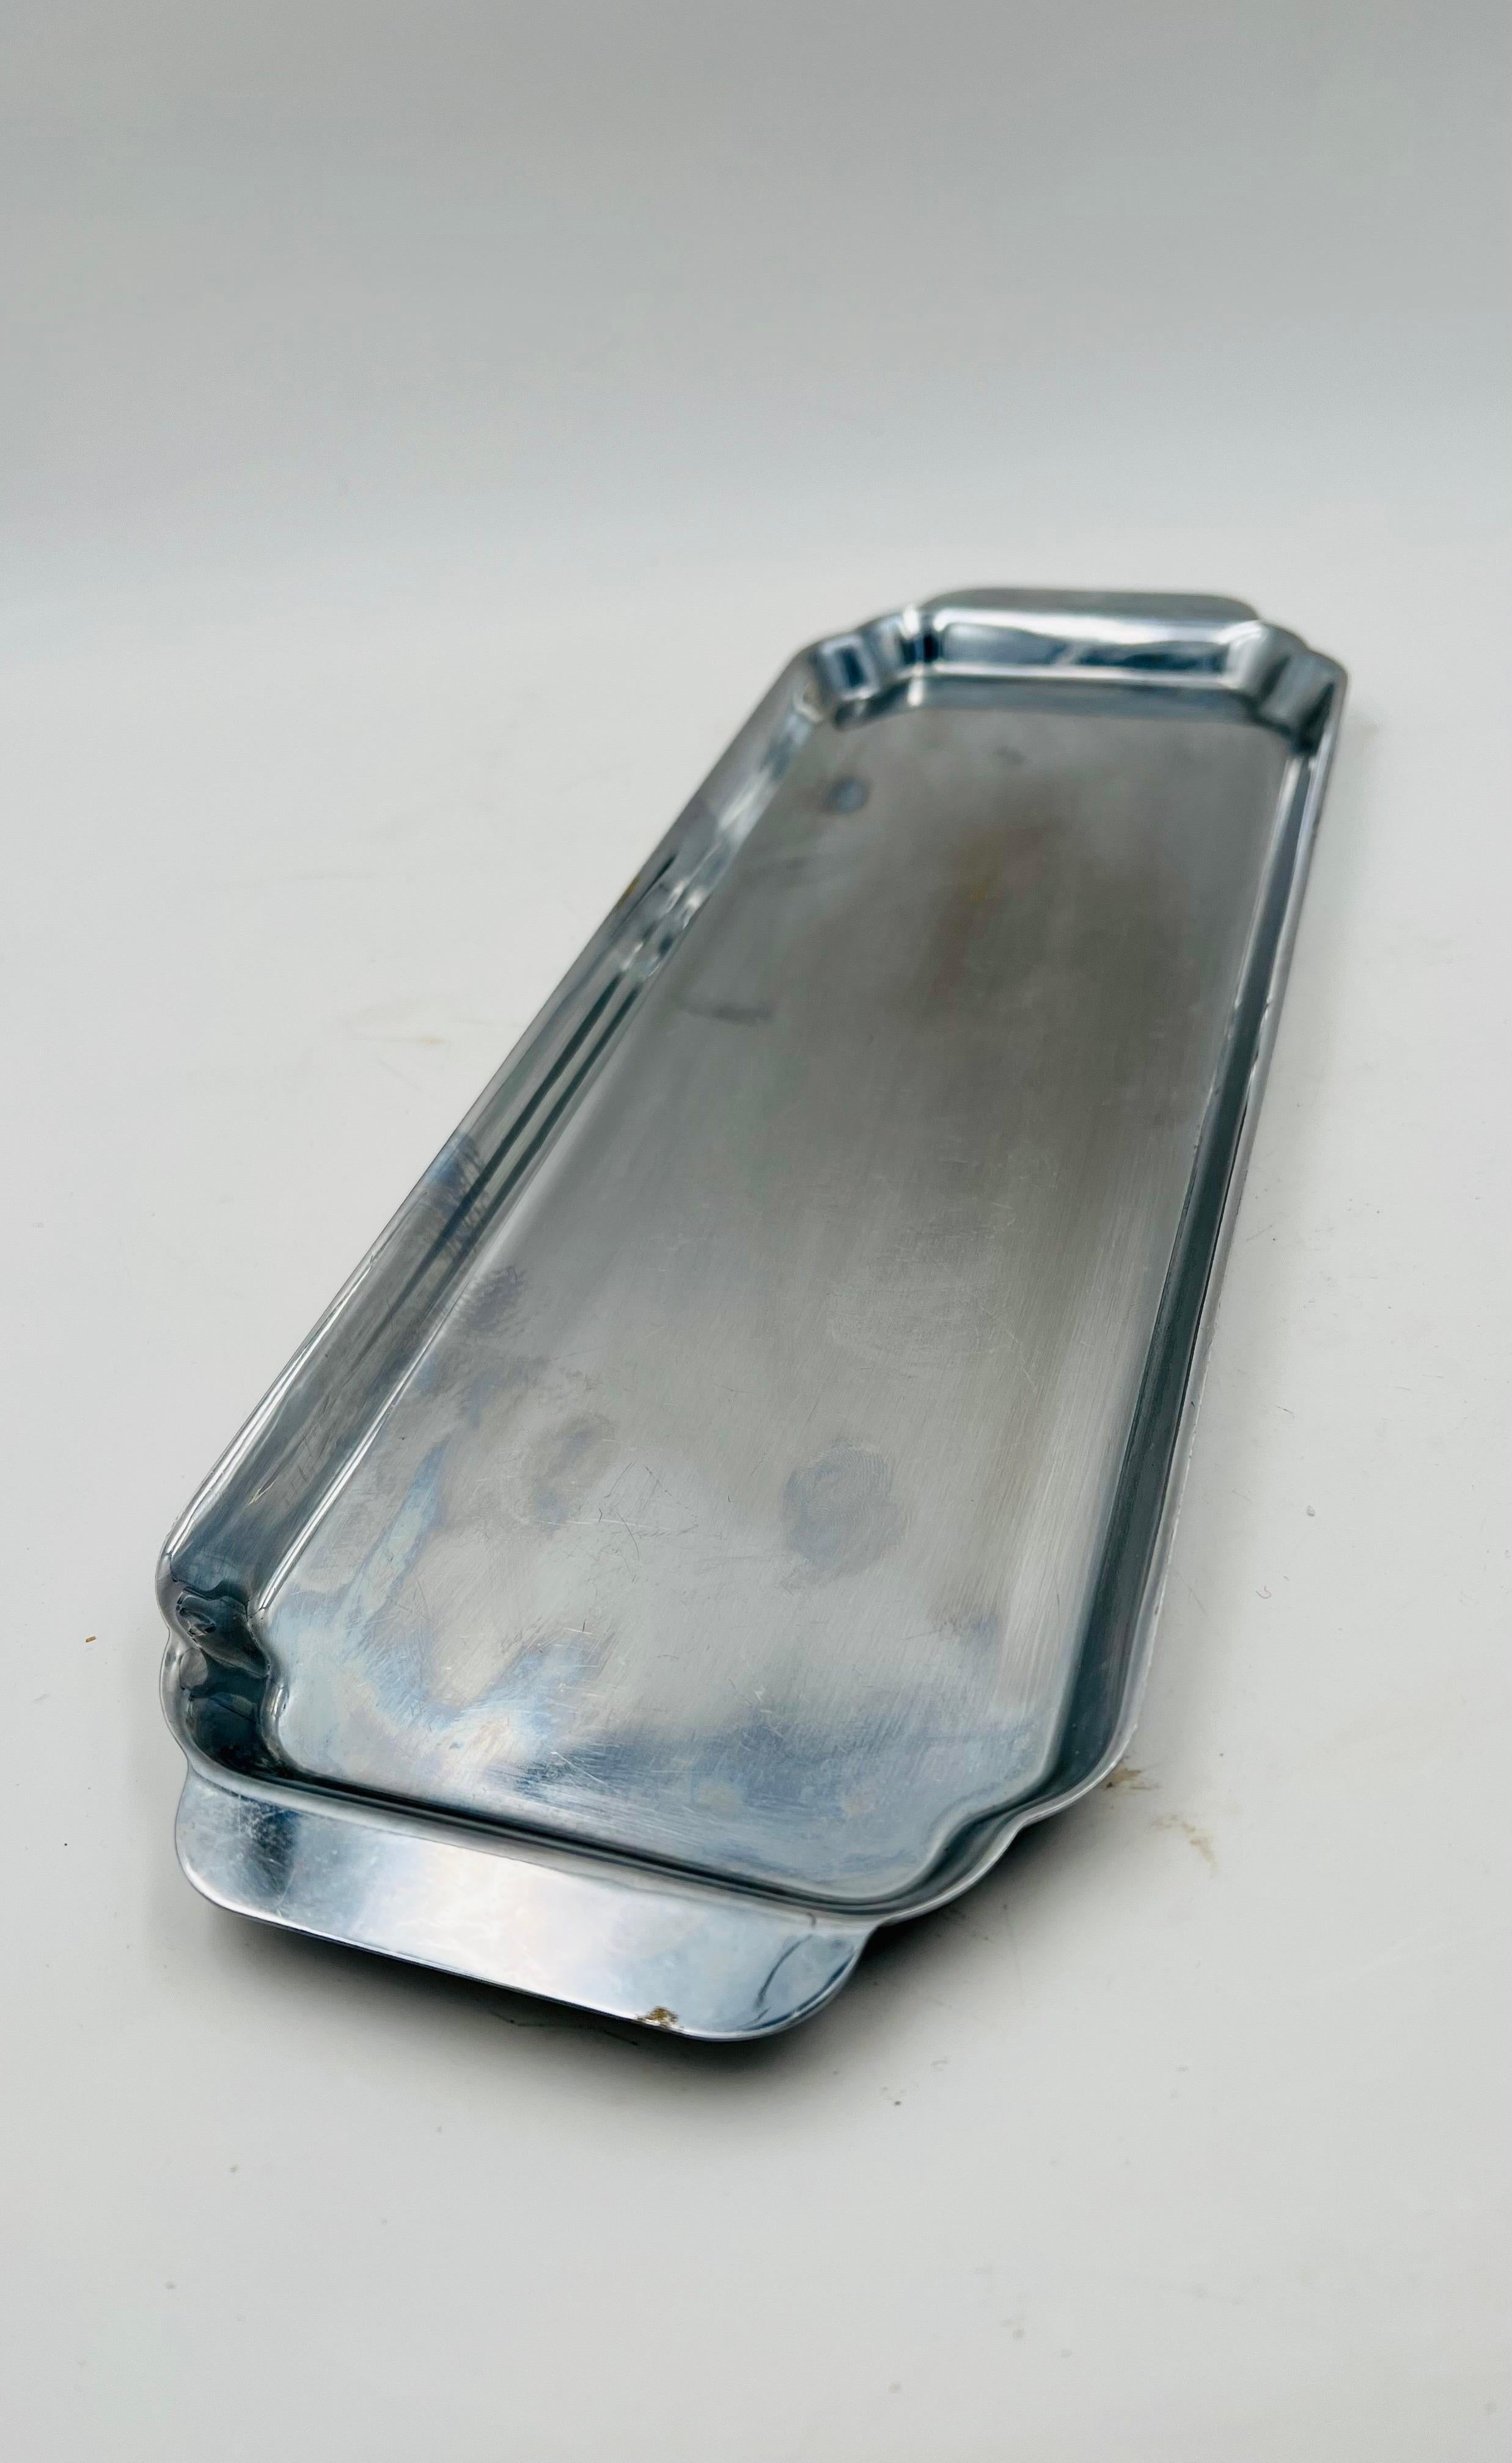 Beautiful and rare chrome plated art deco tray by Chase some light wear on the center stamped at the bottom.